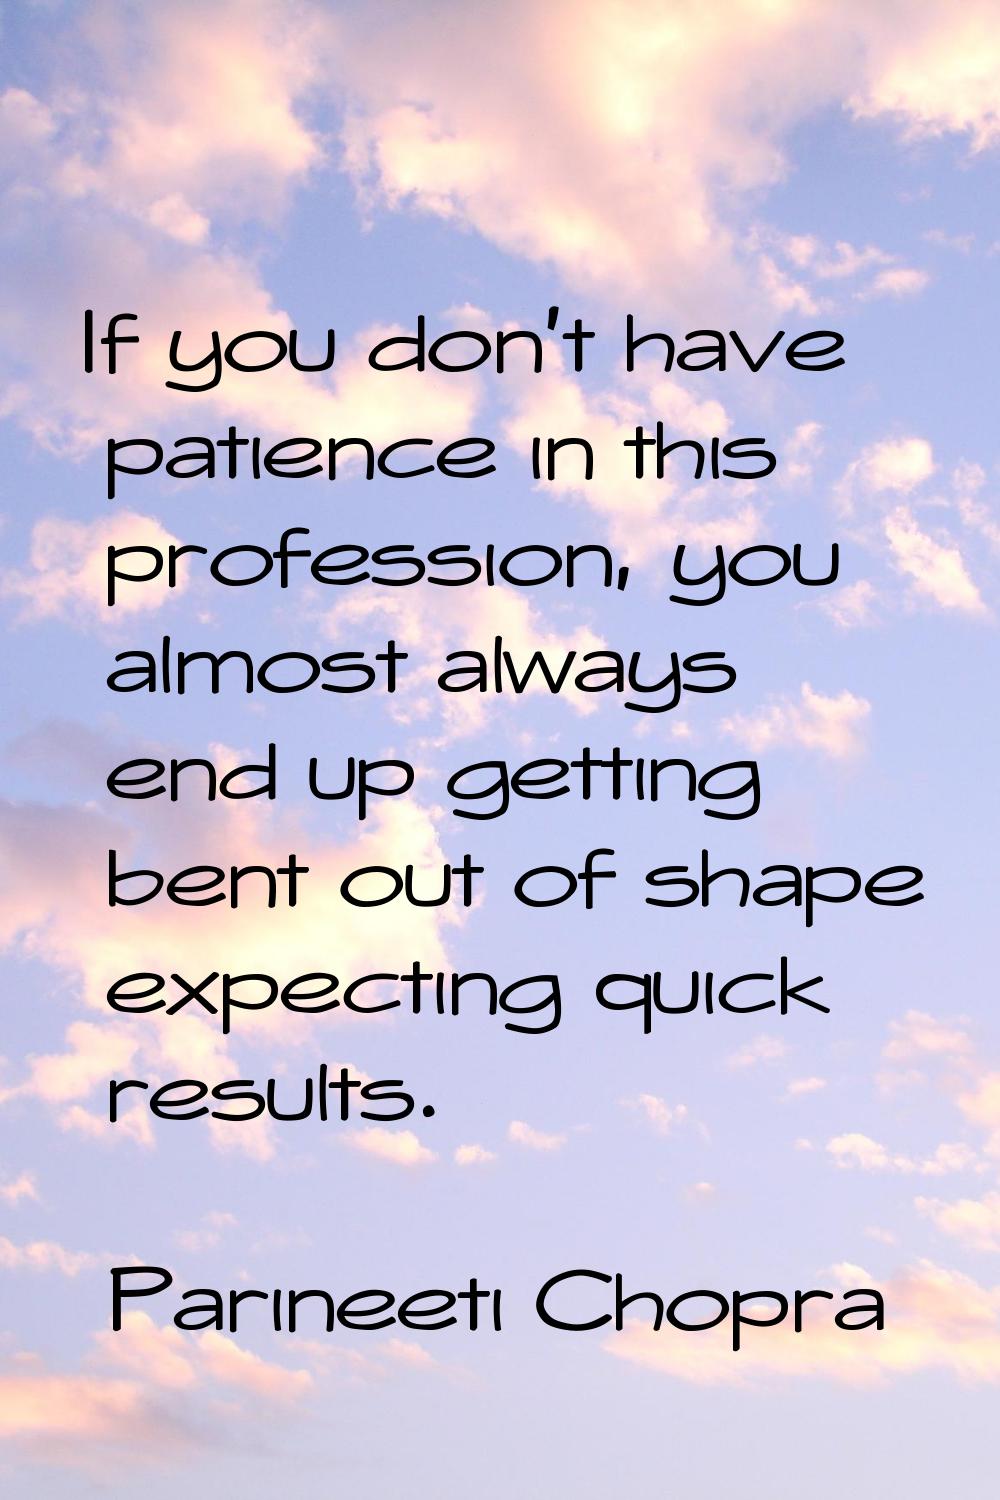 If you don't have patience in this profession, you almost always end up getting bent out of shape e